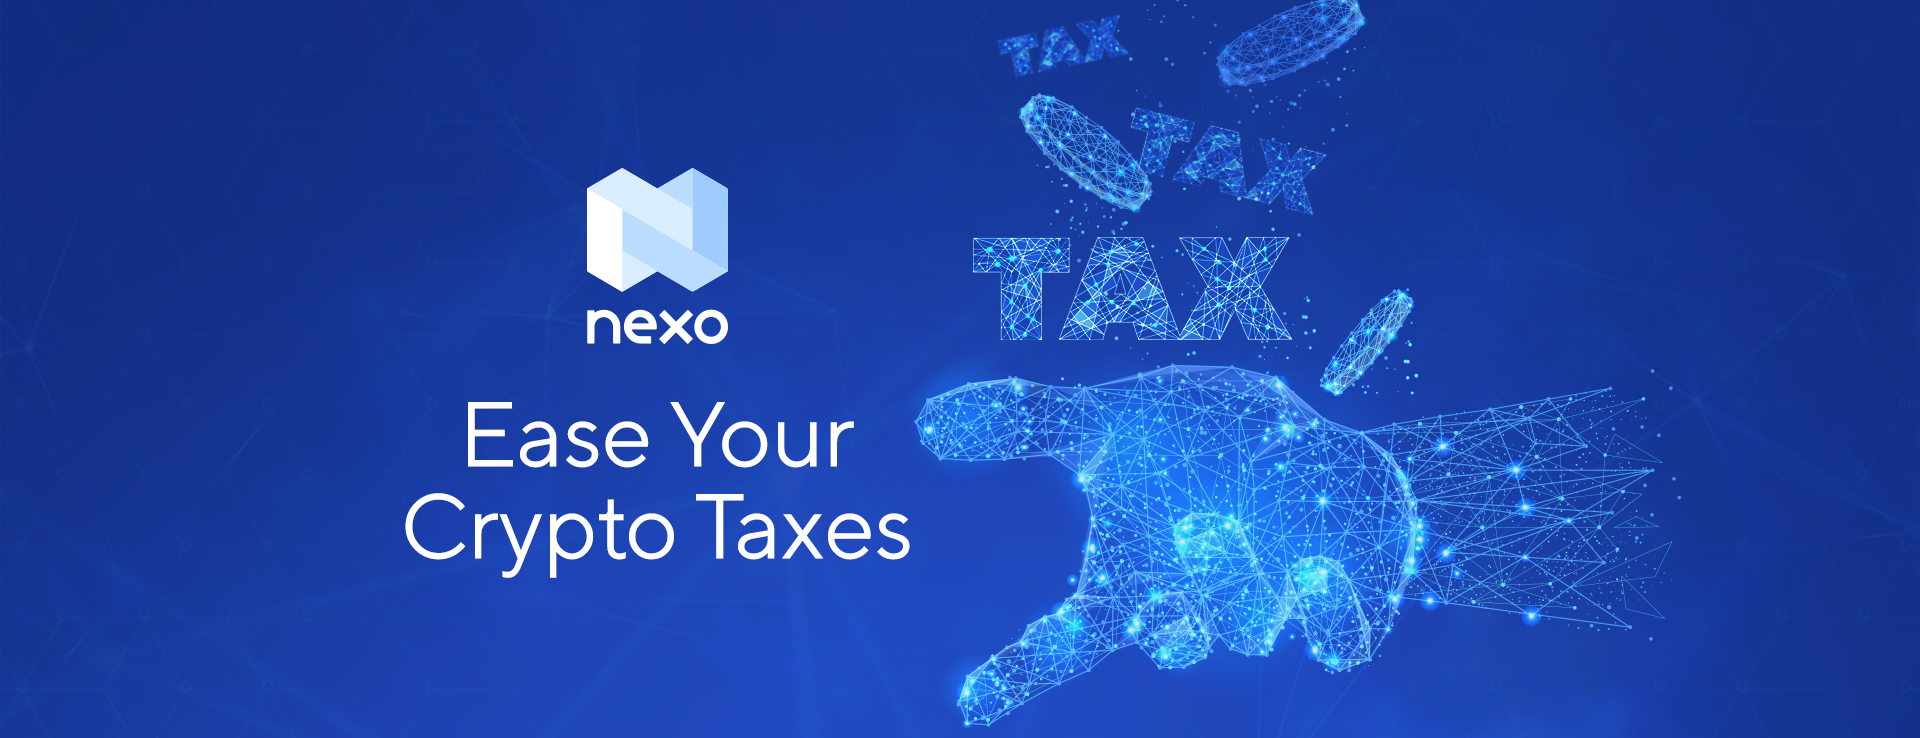 How To Ease Your Crypto Tax Burden*